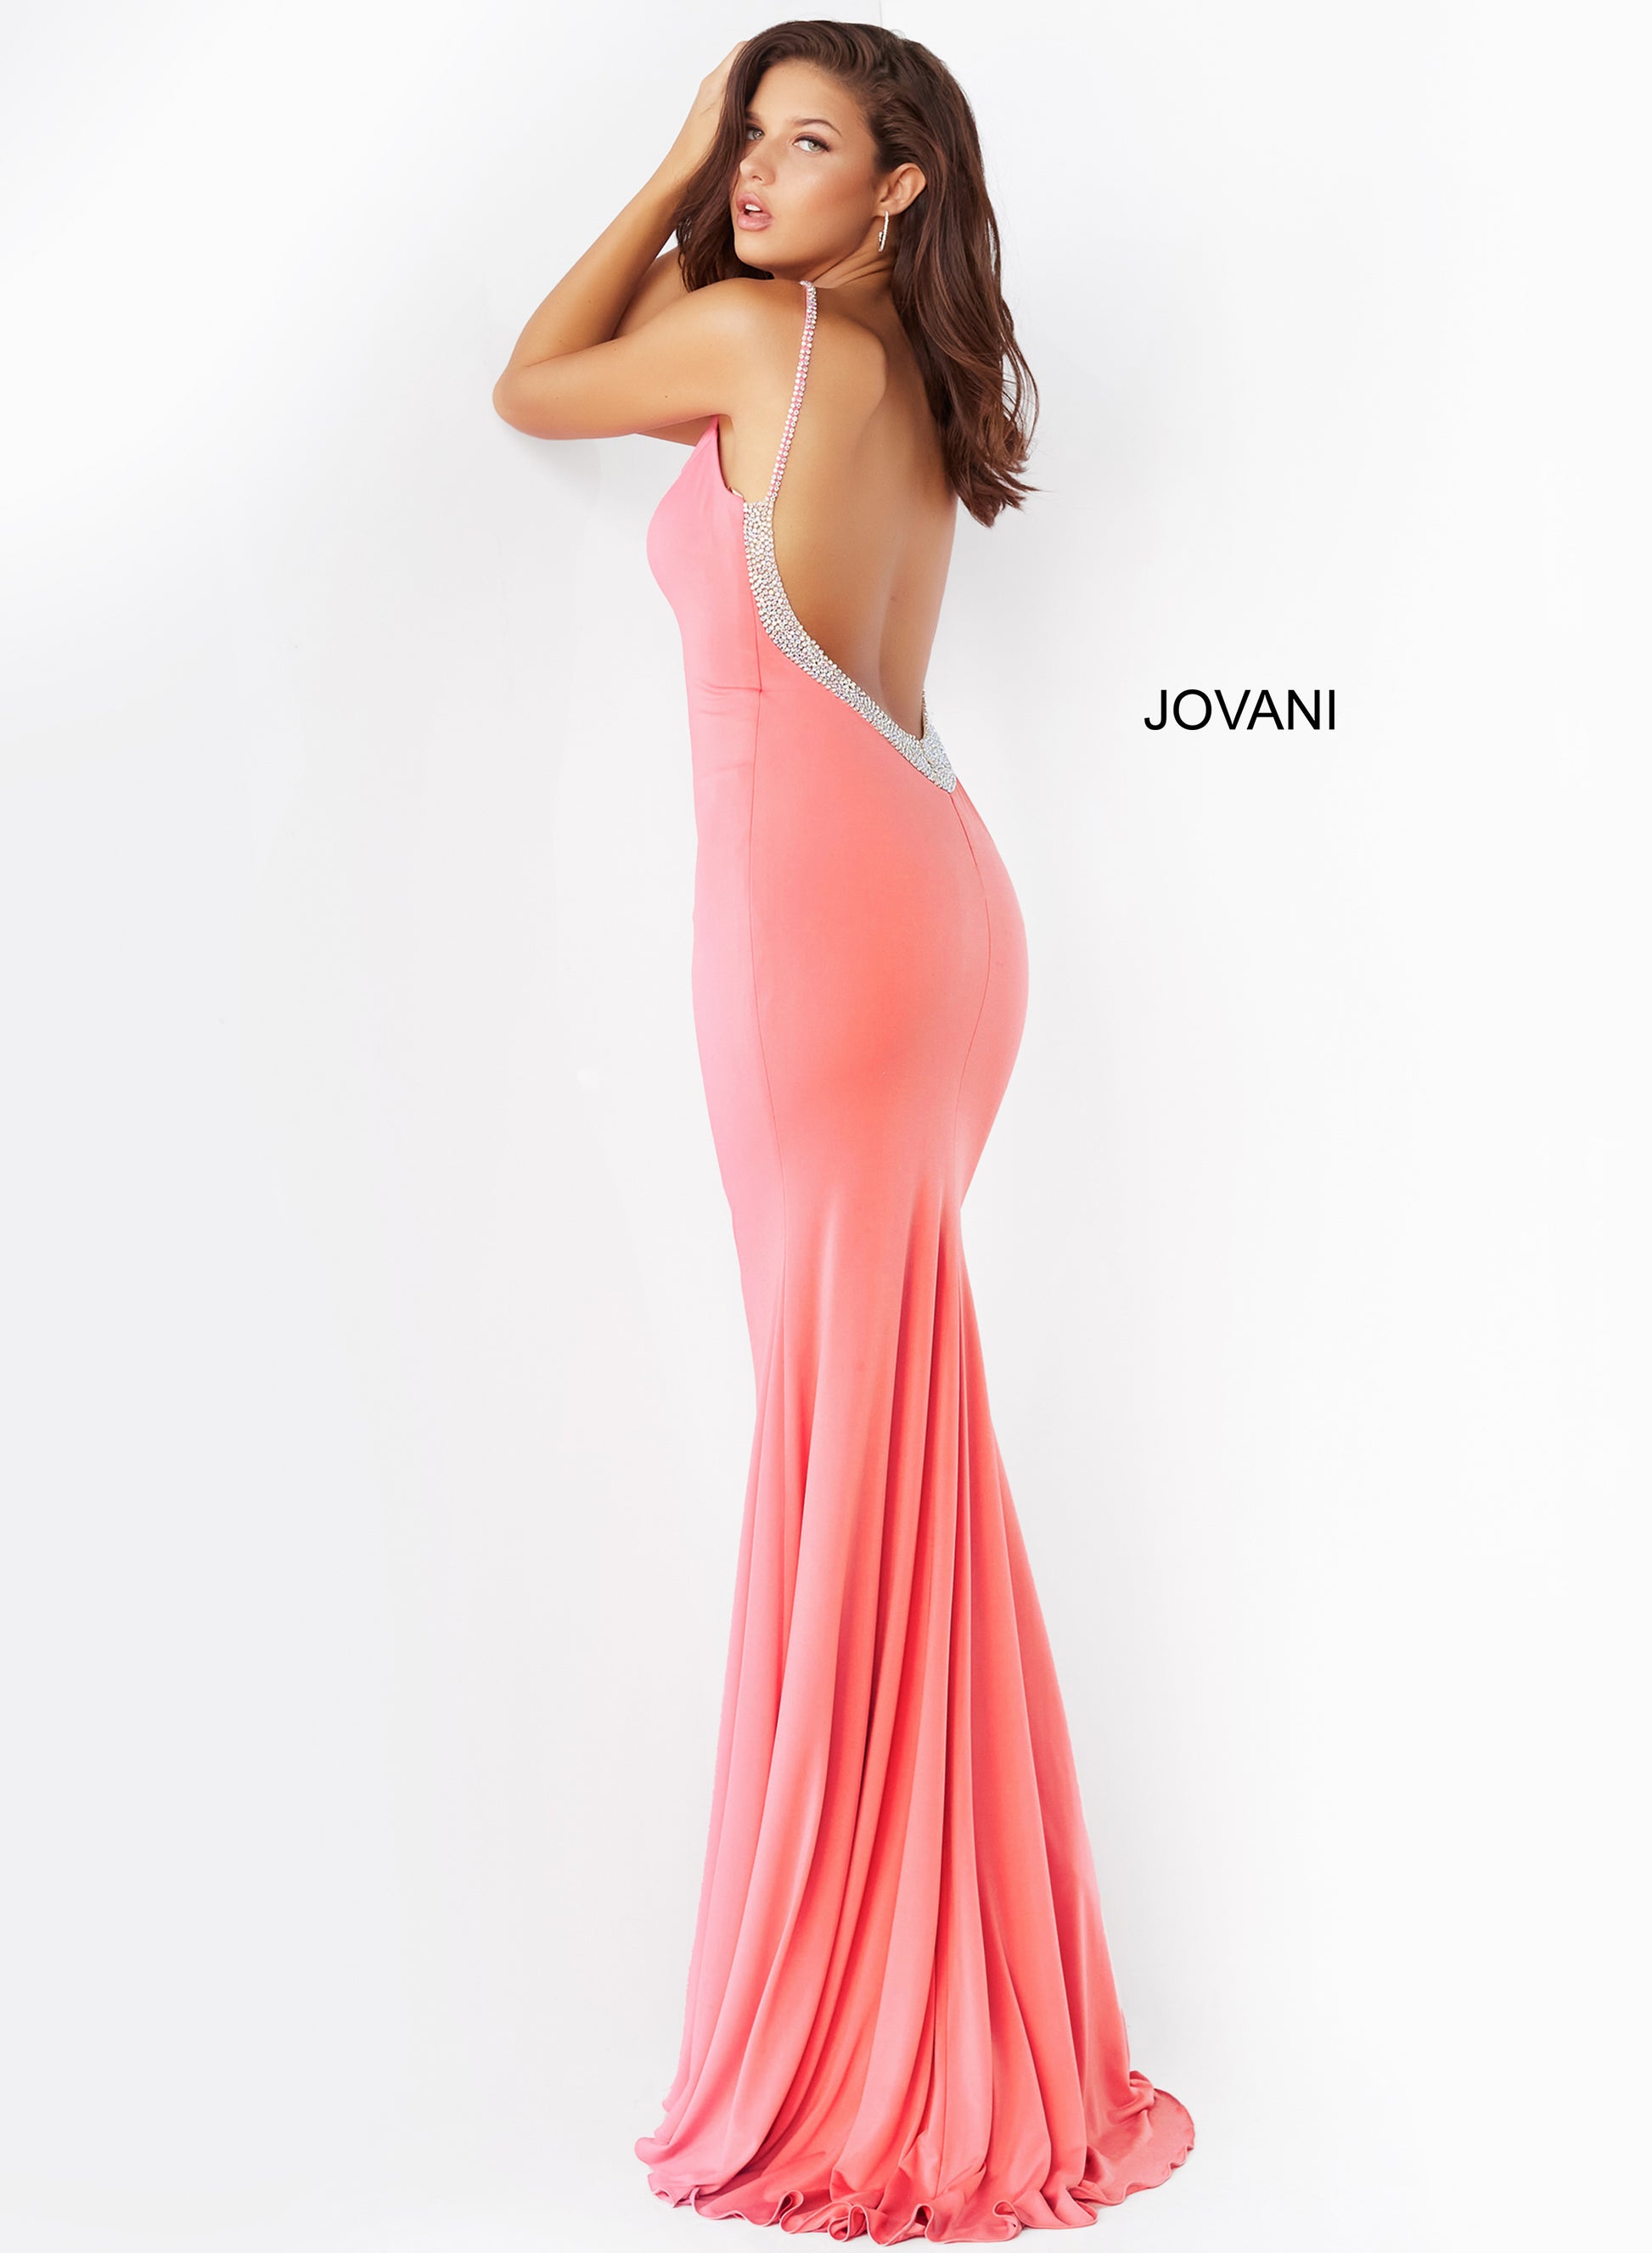 The Jovani 07297 Hot Pink Backless V-Neck Prom Dress is the epitome of elegance and glamour. This form-fitting prom dress is designed to hug your curves in all the right places and features a hot pink hue and a mesmerizing V neckline. The embellished spaghetti straps add a touch of shimmer and sparkle, while the low back, adorned with stones, gives a hint of sexiness to this stunning gown.